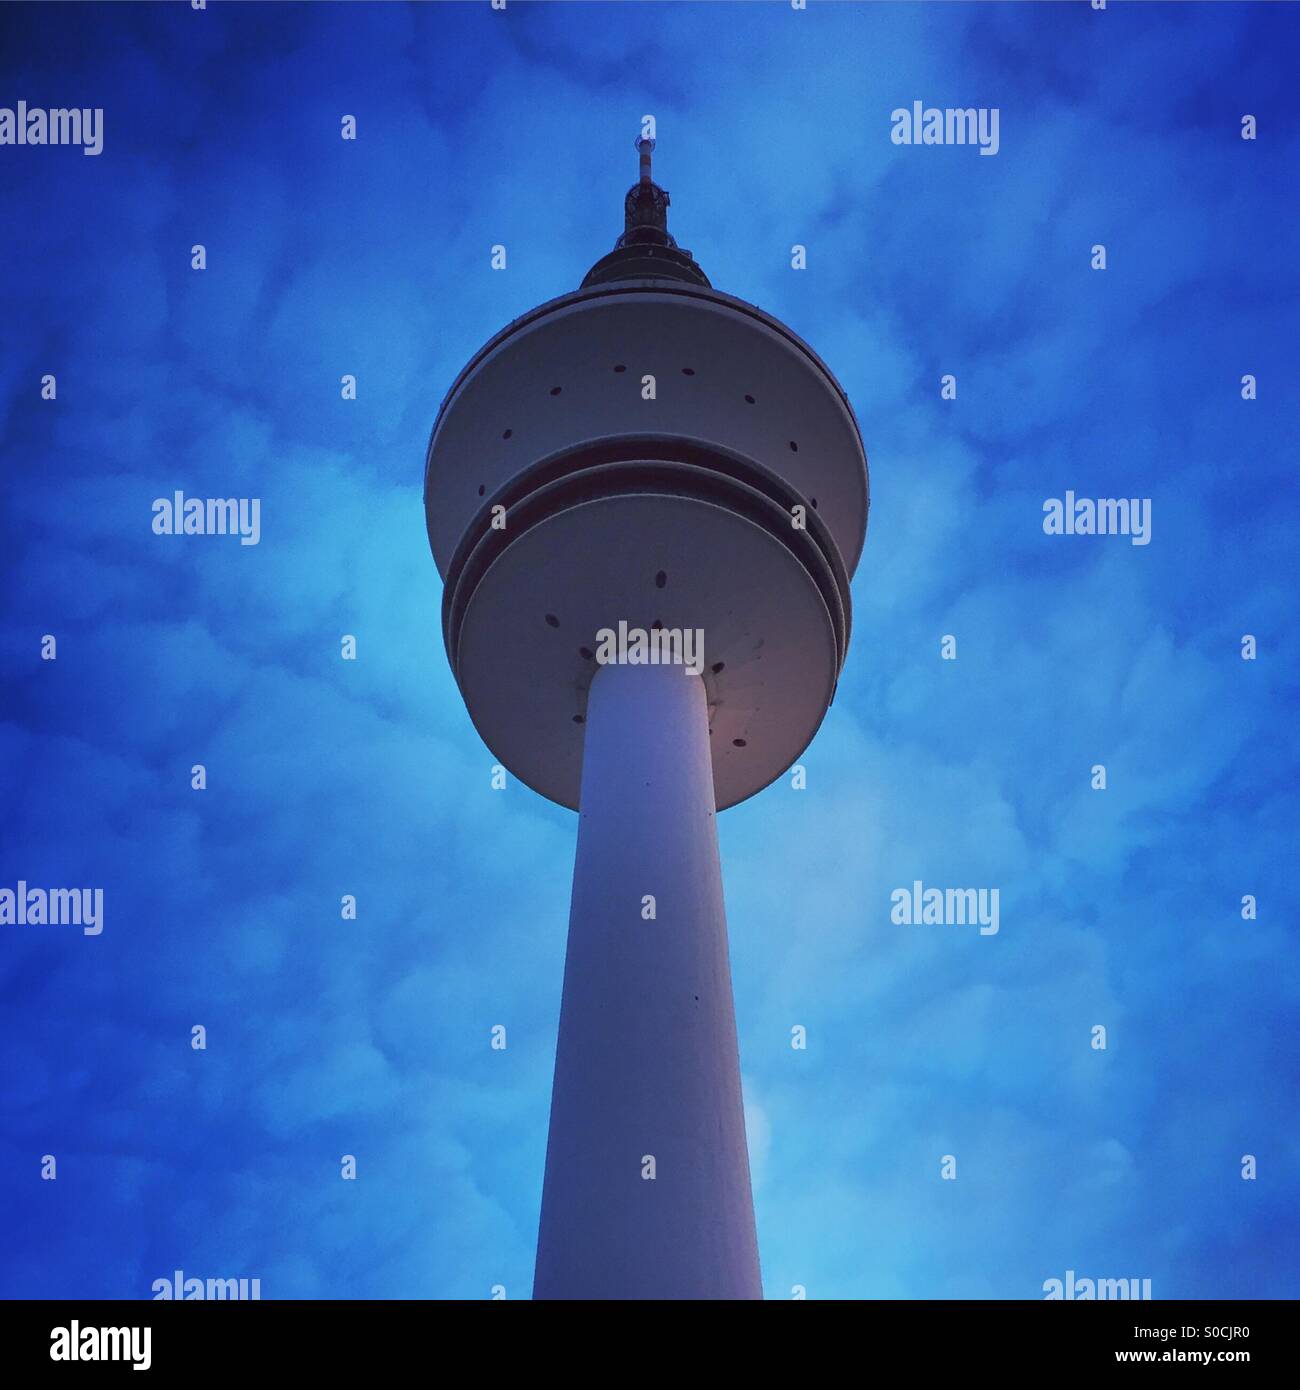 Hamburg's TV tower in front of the evening sky Stock Photo